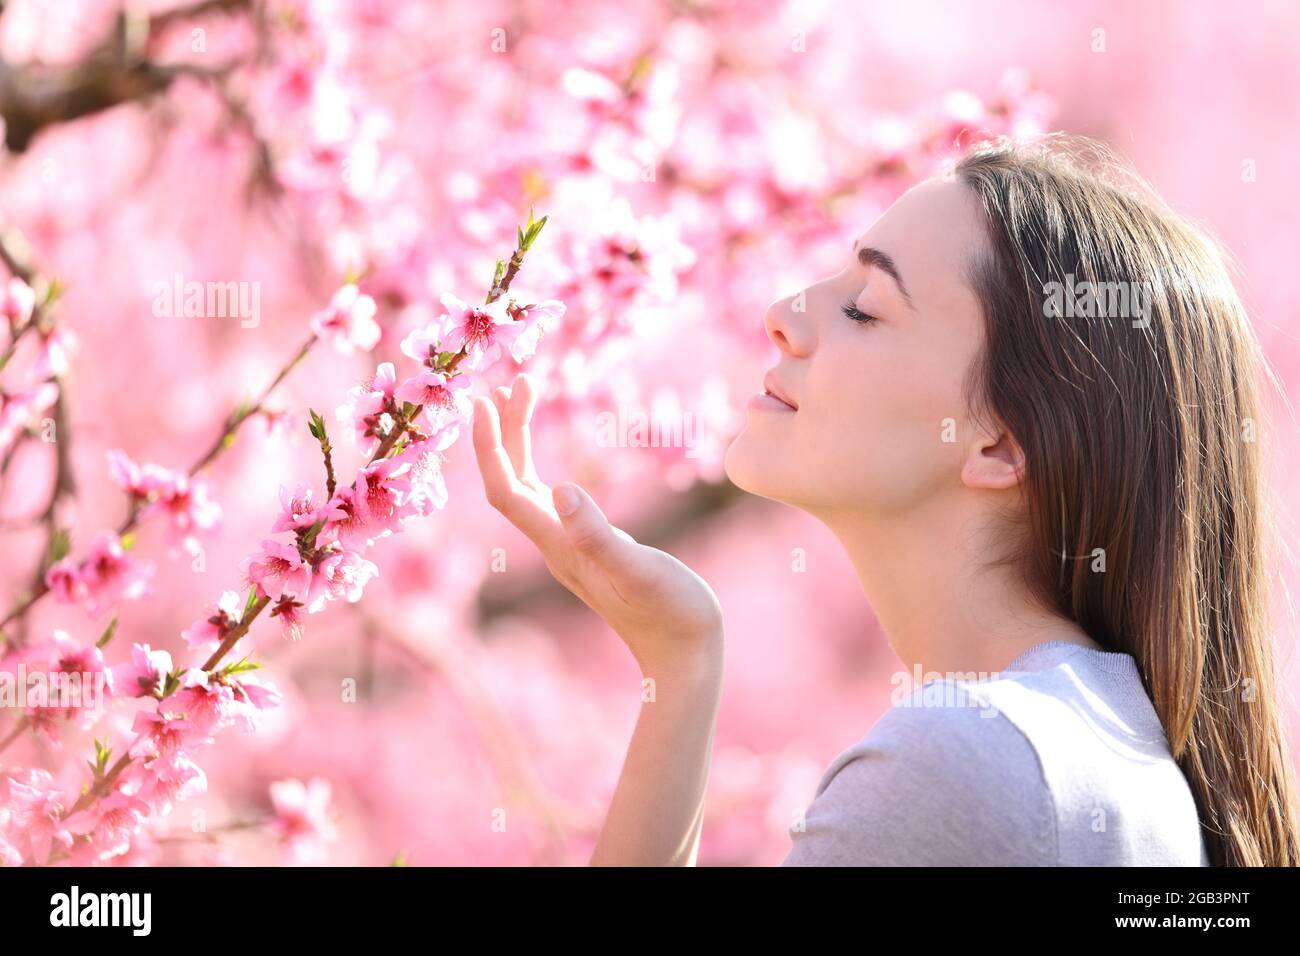 Profile of a woman smelling flowers in a pink field a sunny day Stock Photo